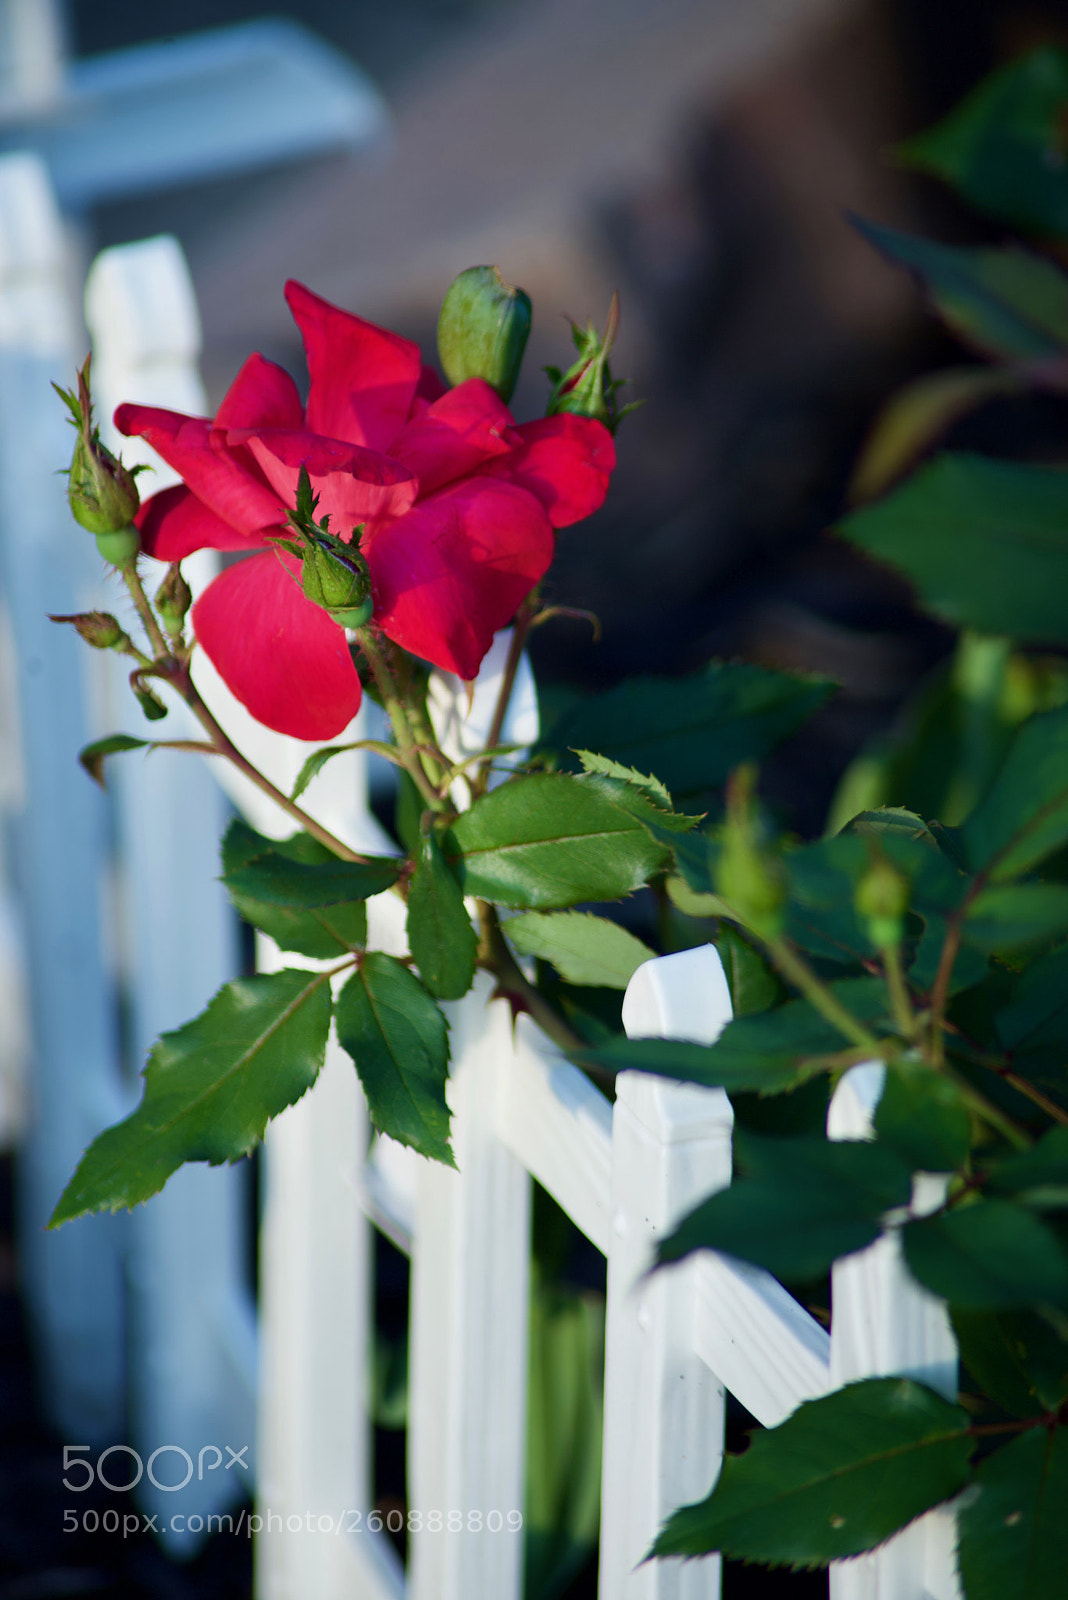 Nikon D750 sample photo. A red rose over photography